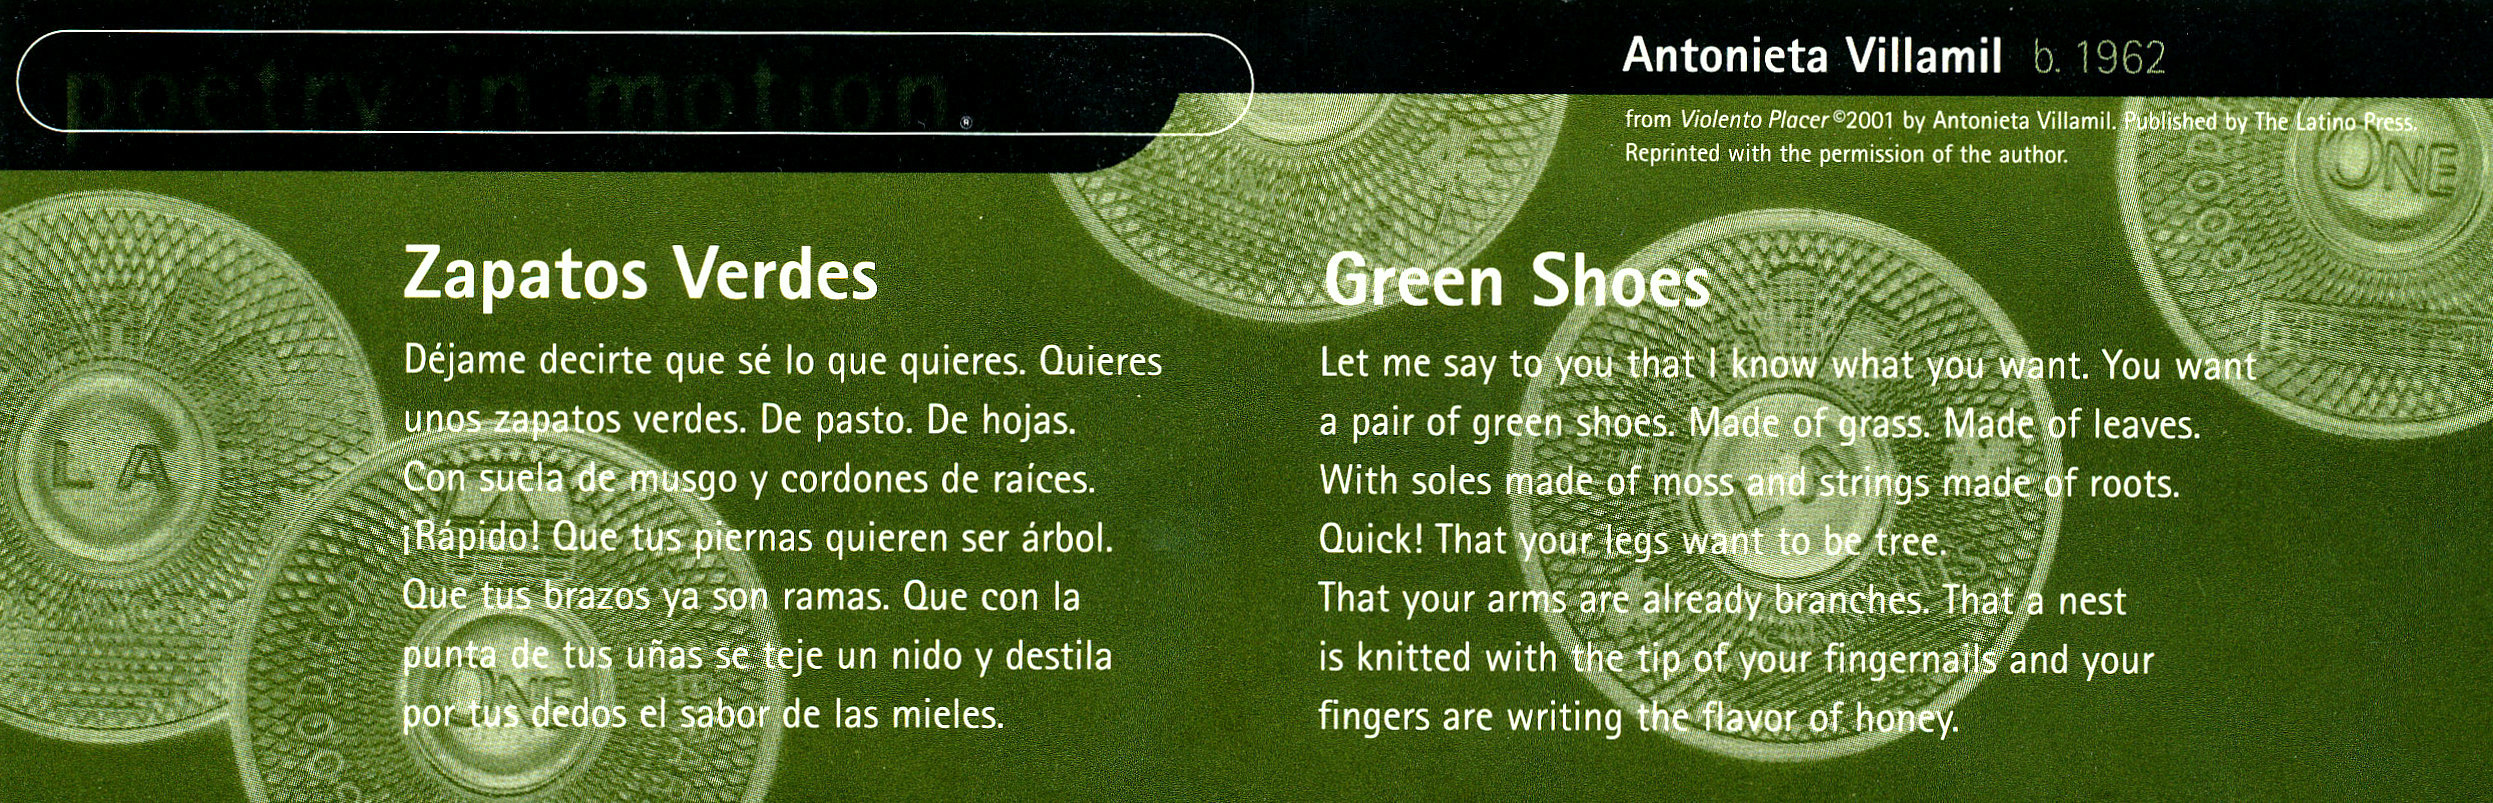 An olive green poster decorated with Los Angeles transit tokens features a poem titled Green Shoes, by Antonieta Villamil.